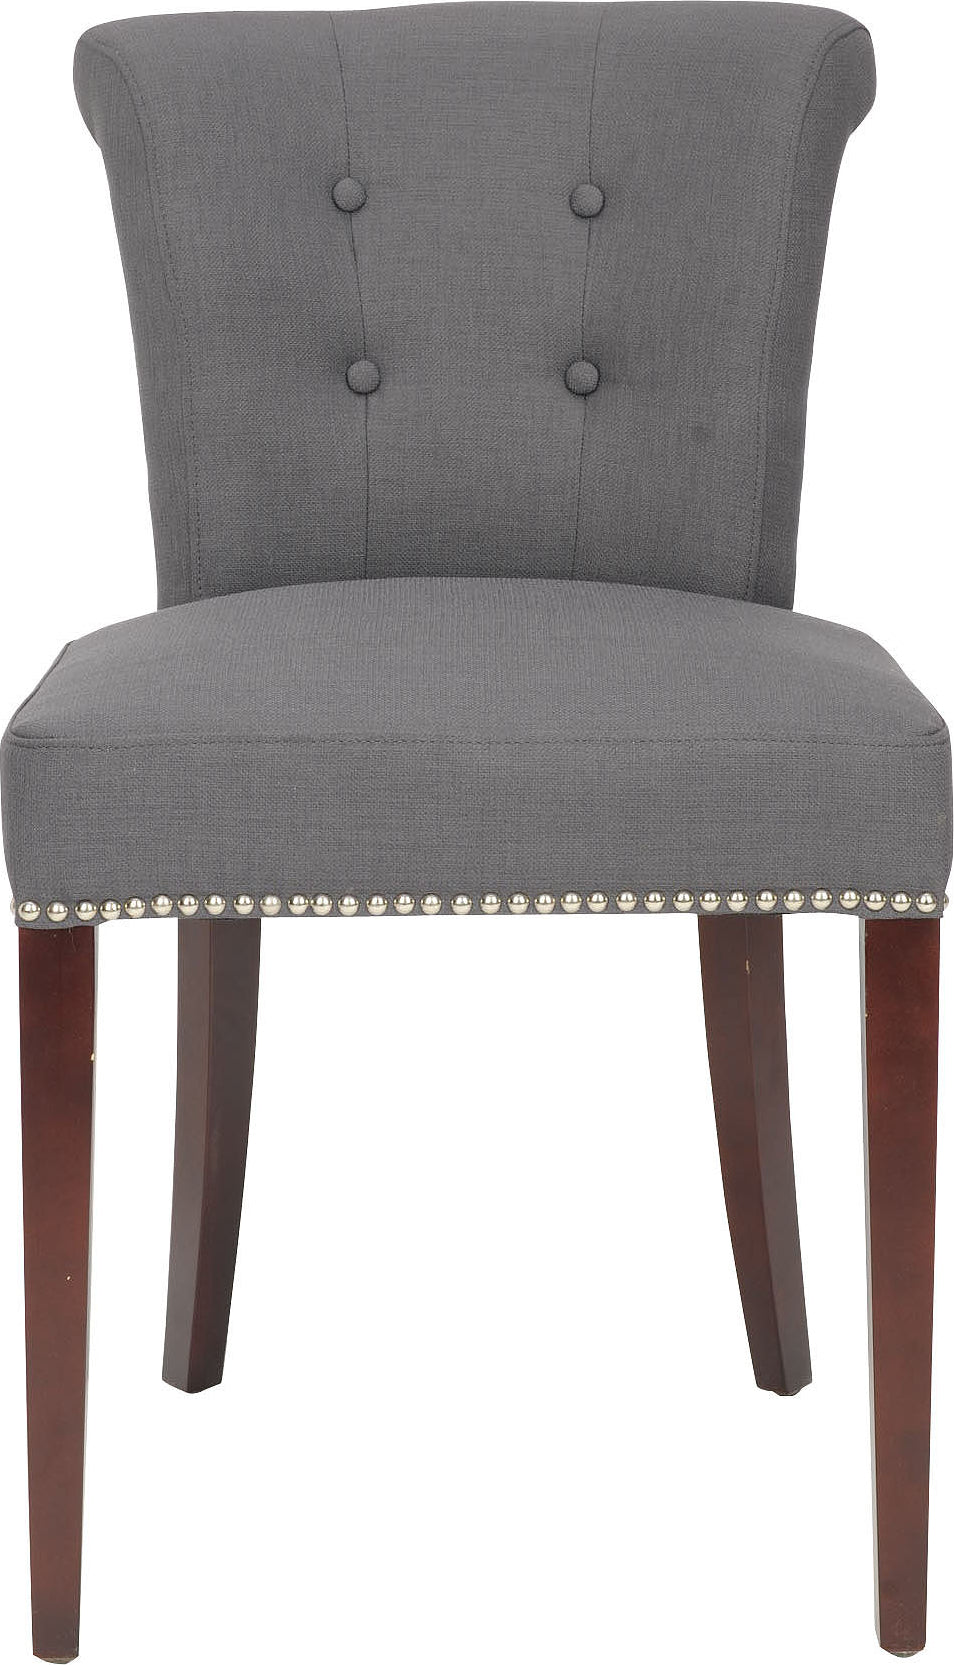 Safavieh Arion 21''H Linen Ring Chair-Nickel Nail Heads (SET Of 2) Charcoal and Cherry Mahogany Furniture main image